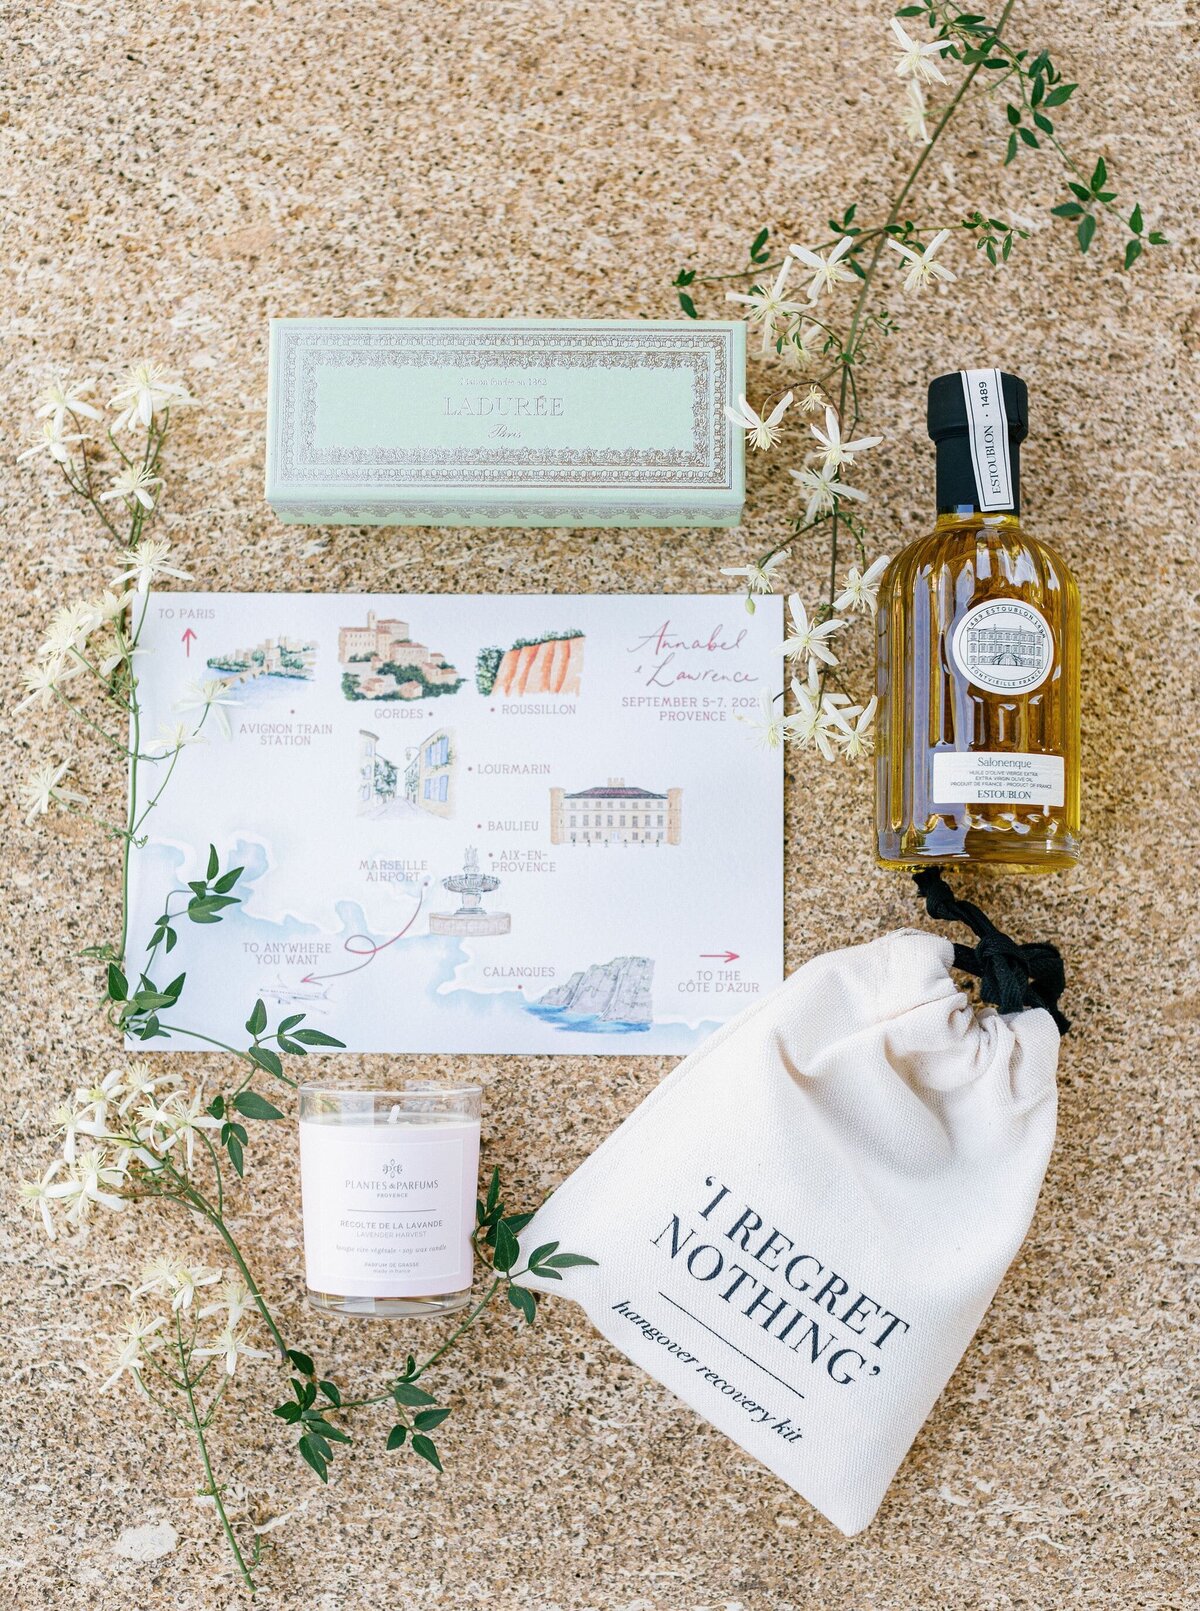 weding-welcome-basket-items-macaroons-olive-oil-candle